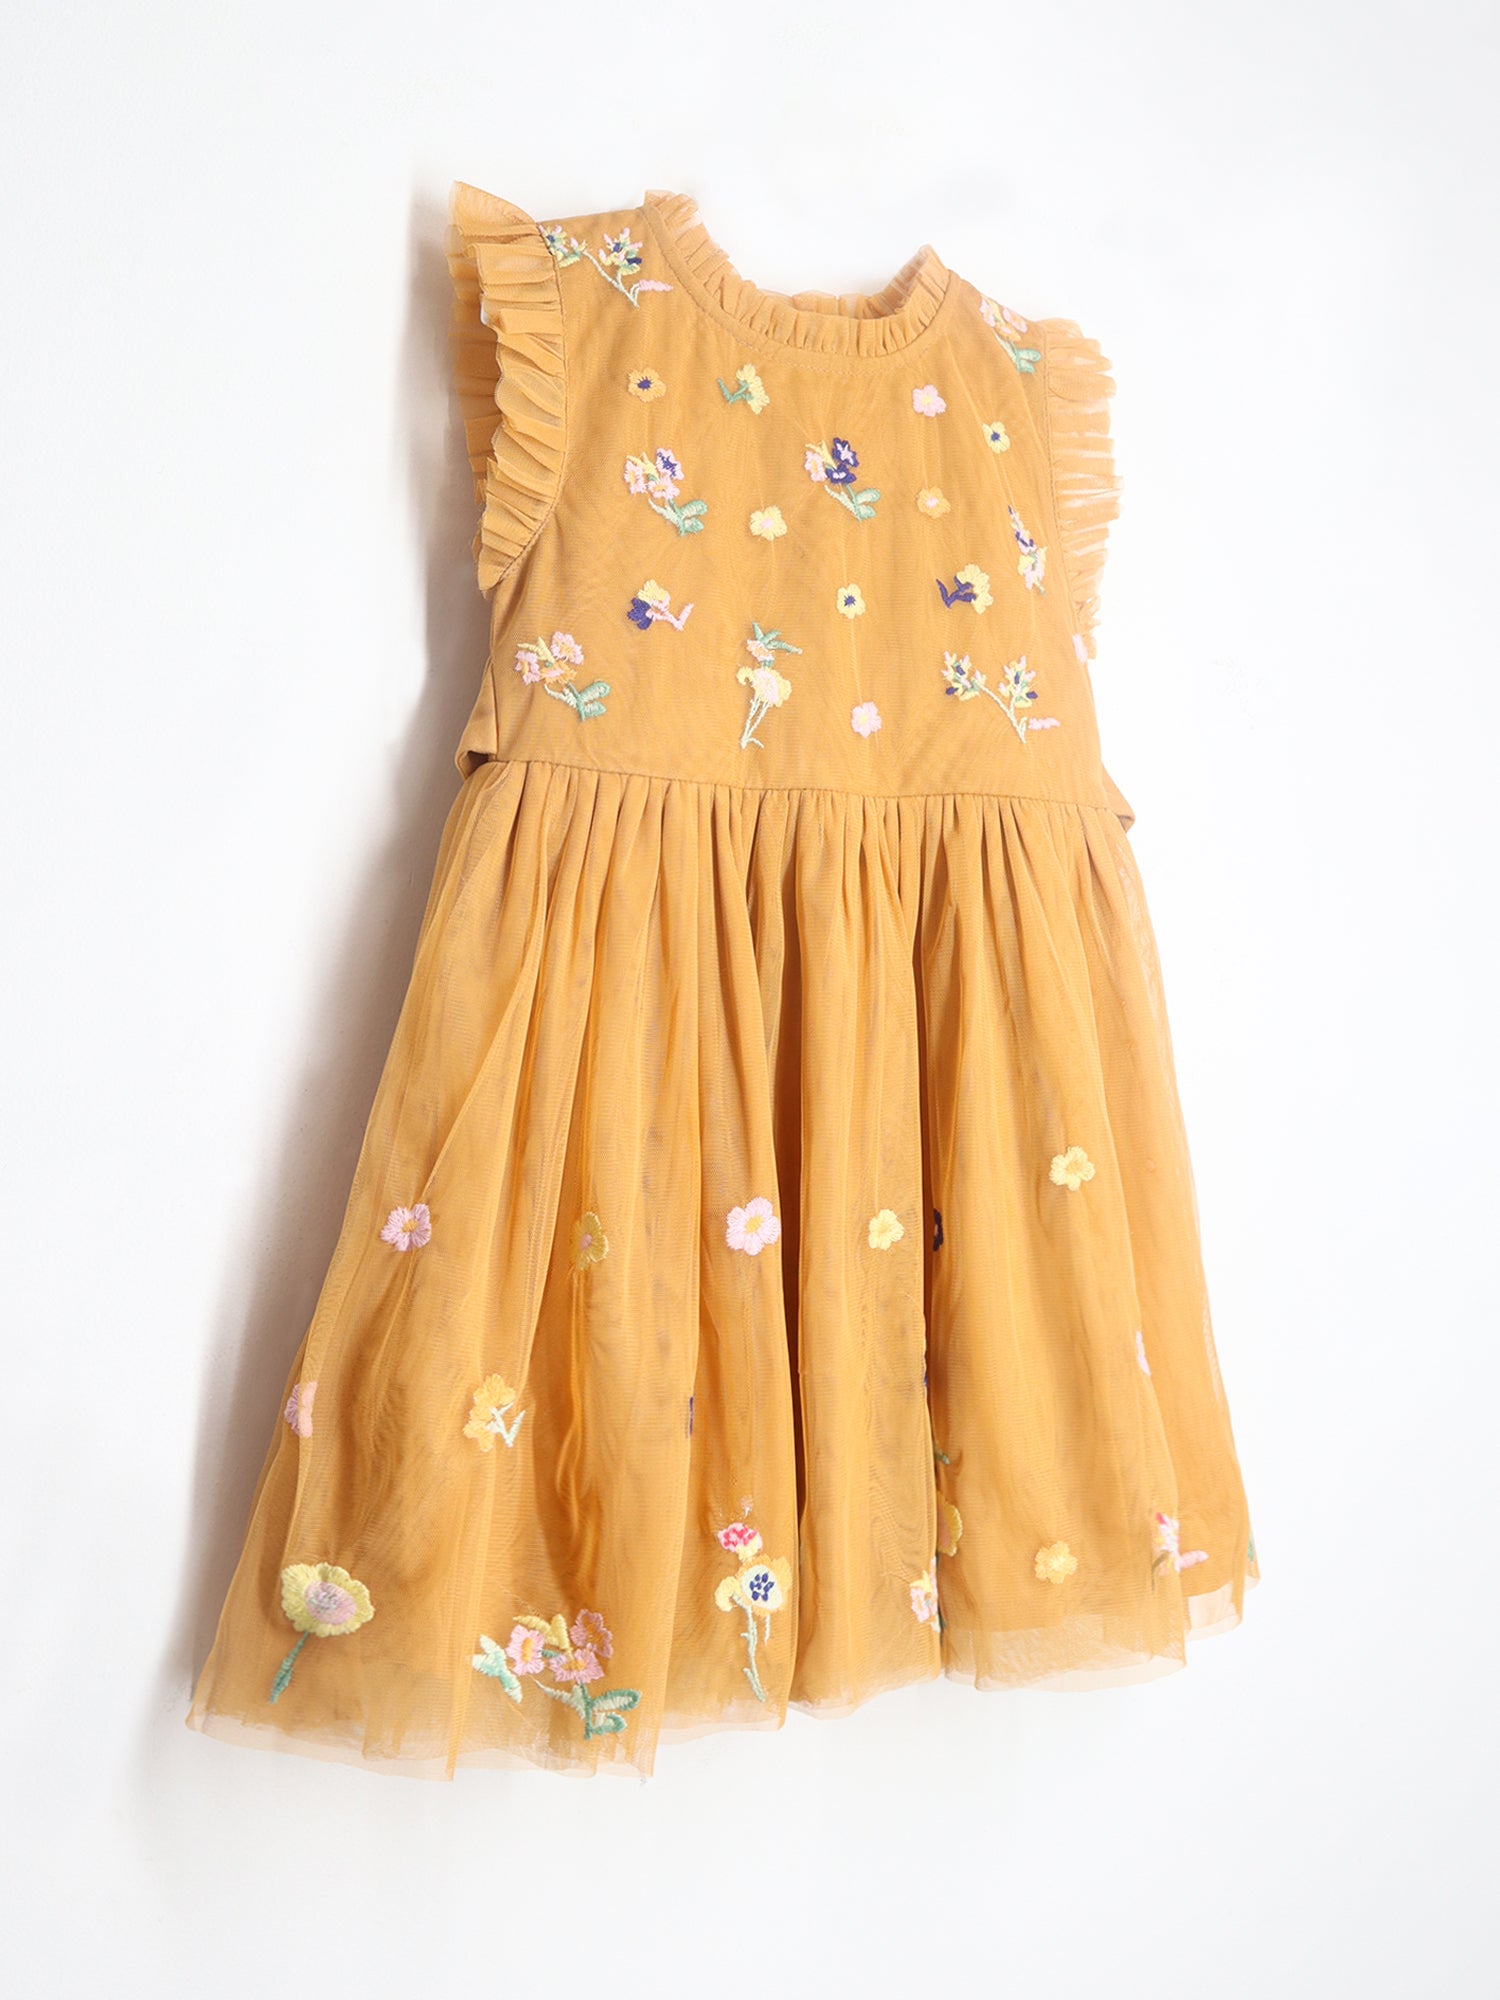 Smart Casual Orange Embroidered Cotton Blend & Frill Sleeves with Zipper Closure Fit & Flared Summer Dress For Girls